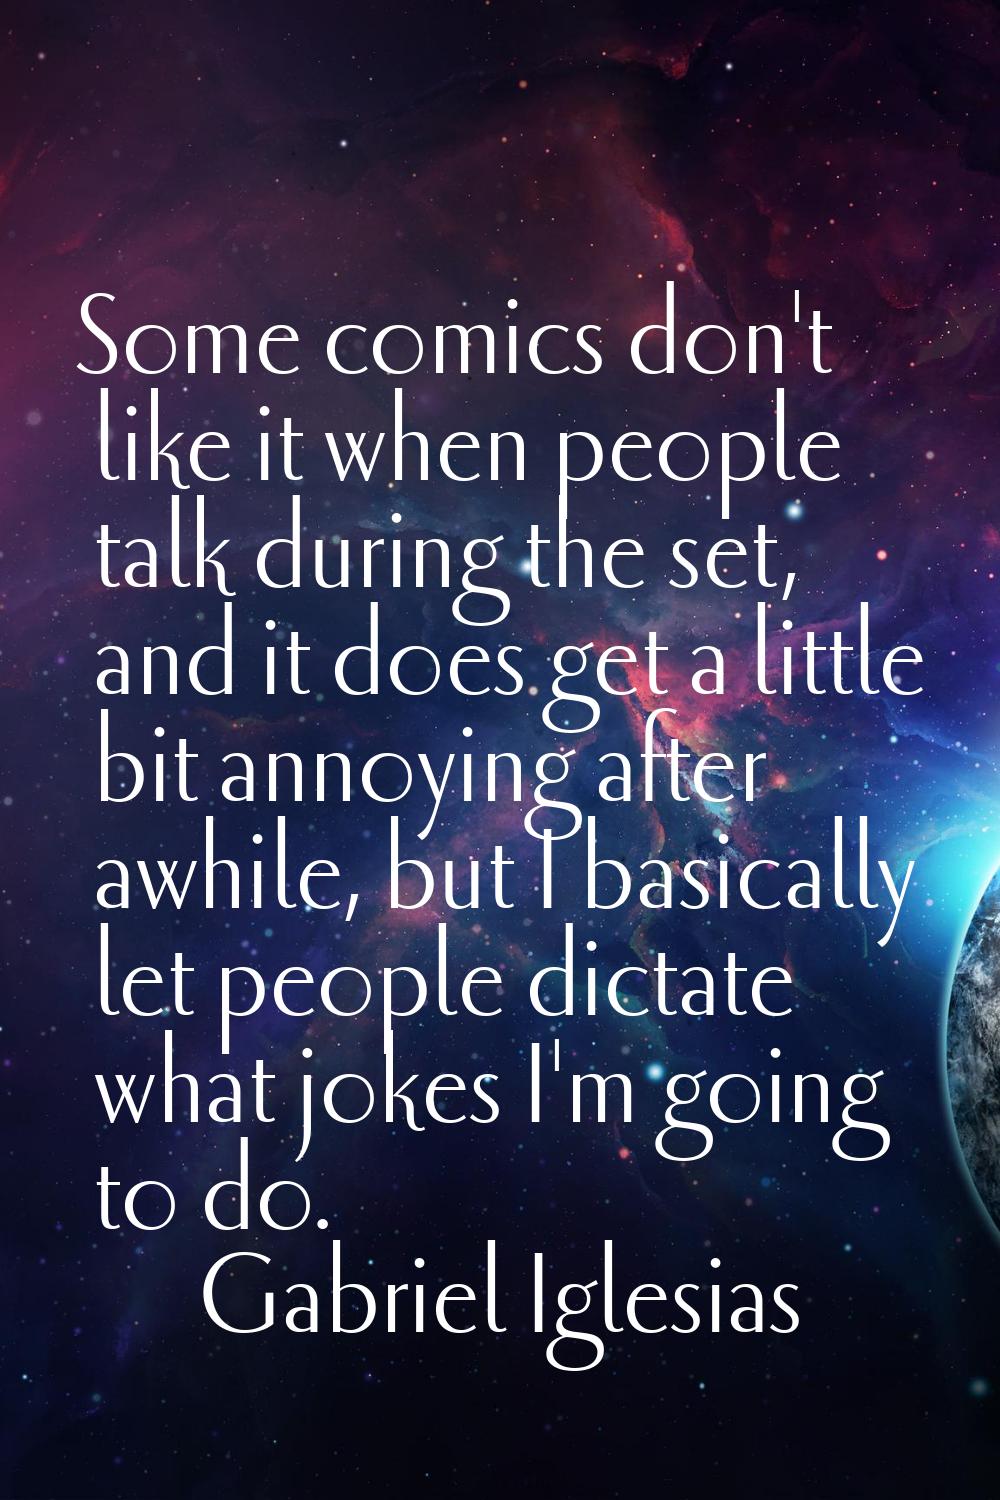 Some comics don't like it when people talk during the set, and it does get a little bit annoying af